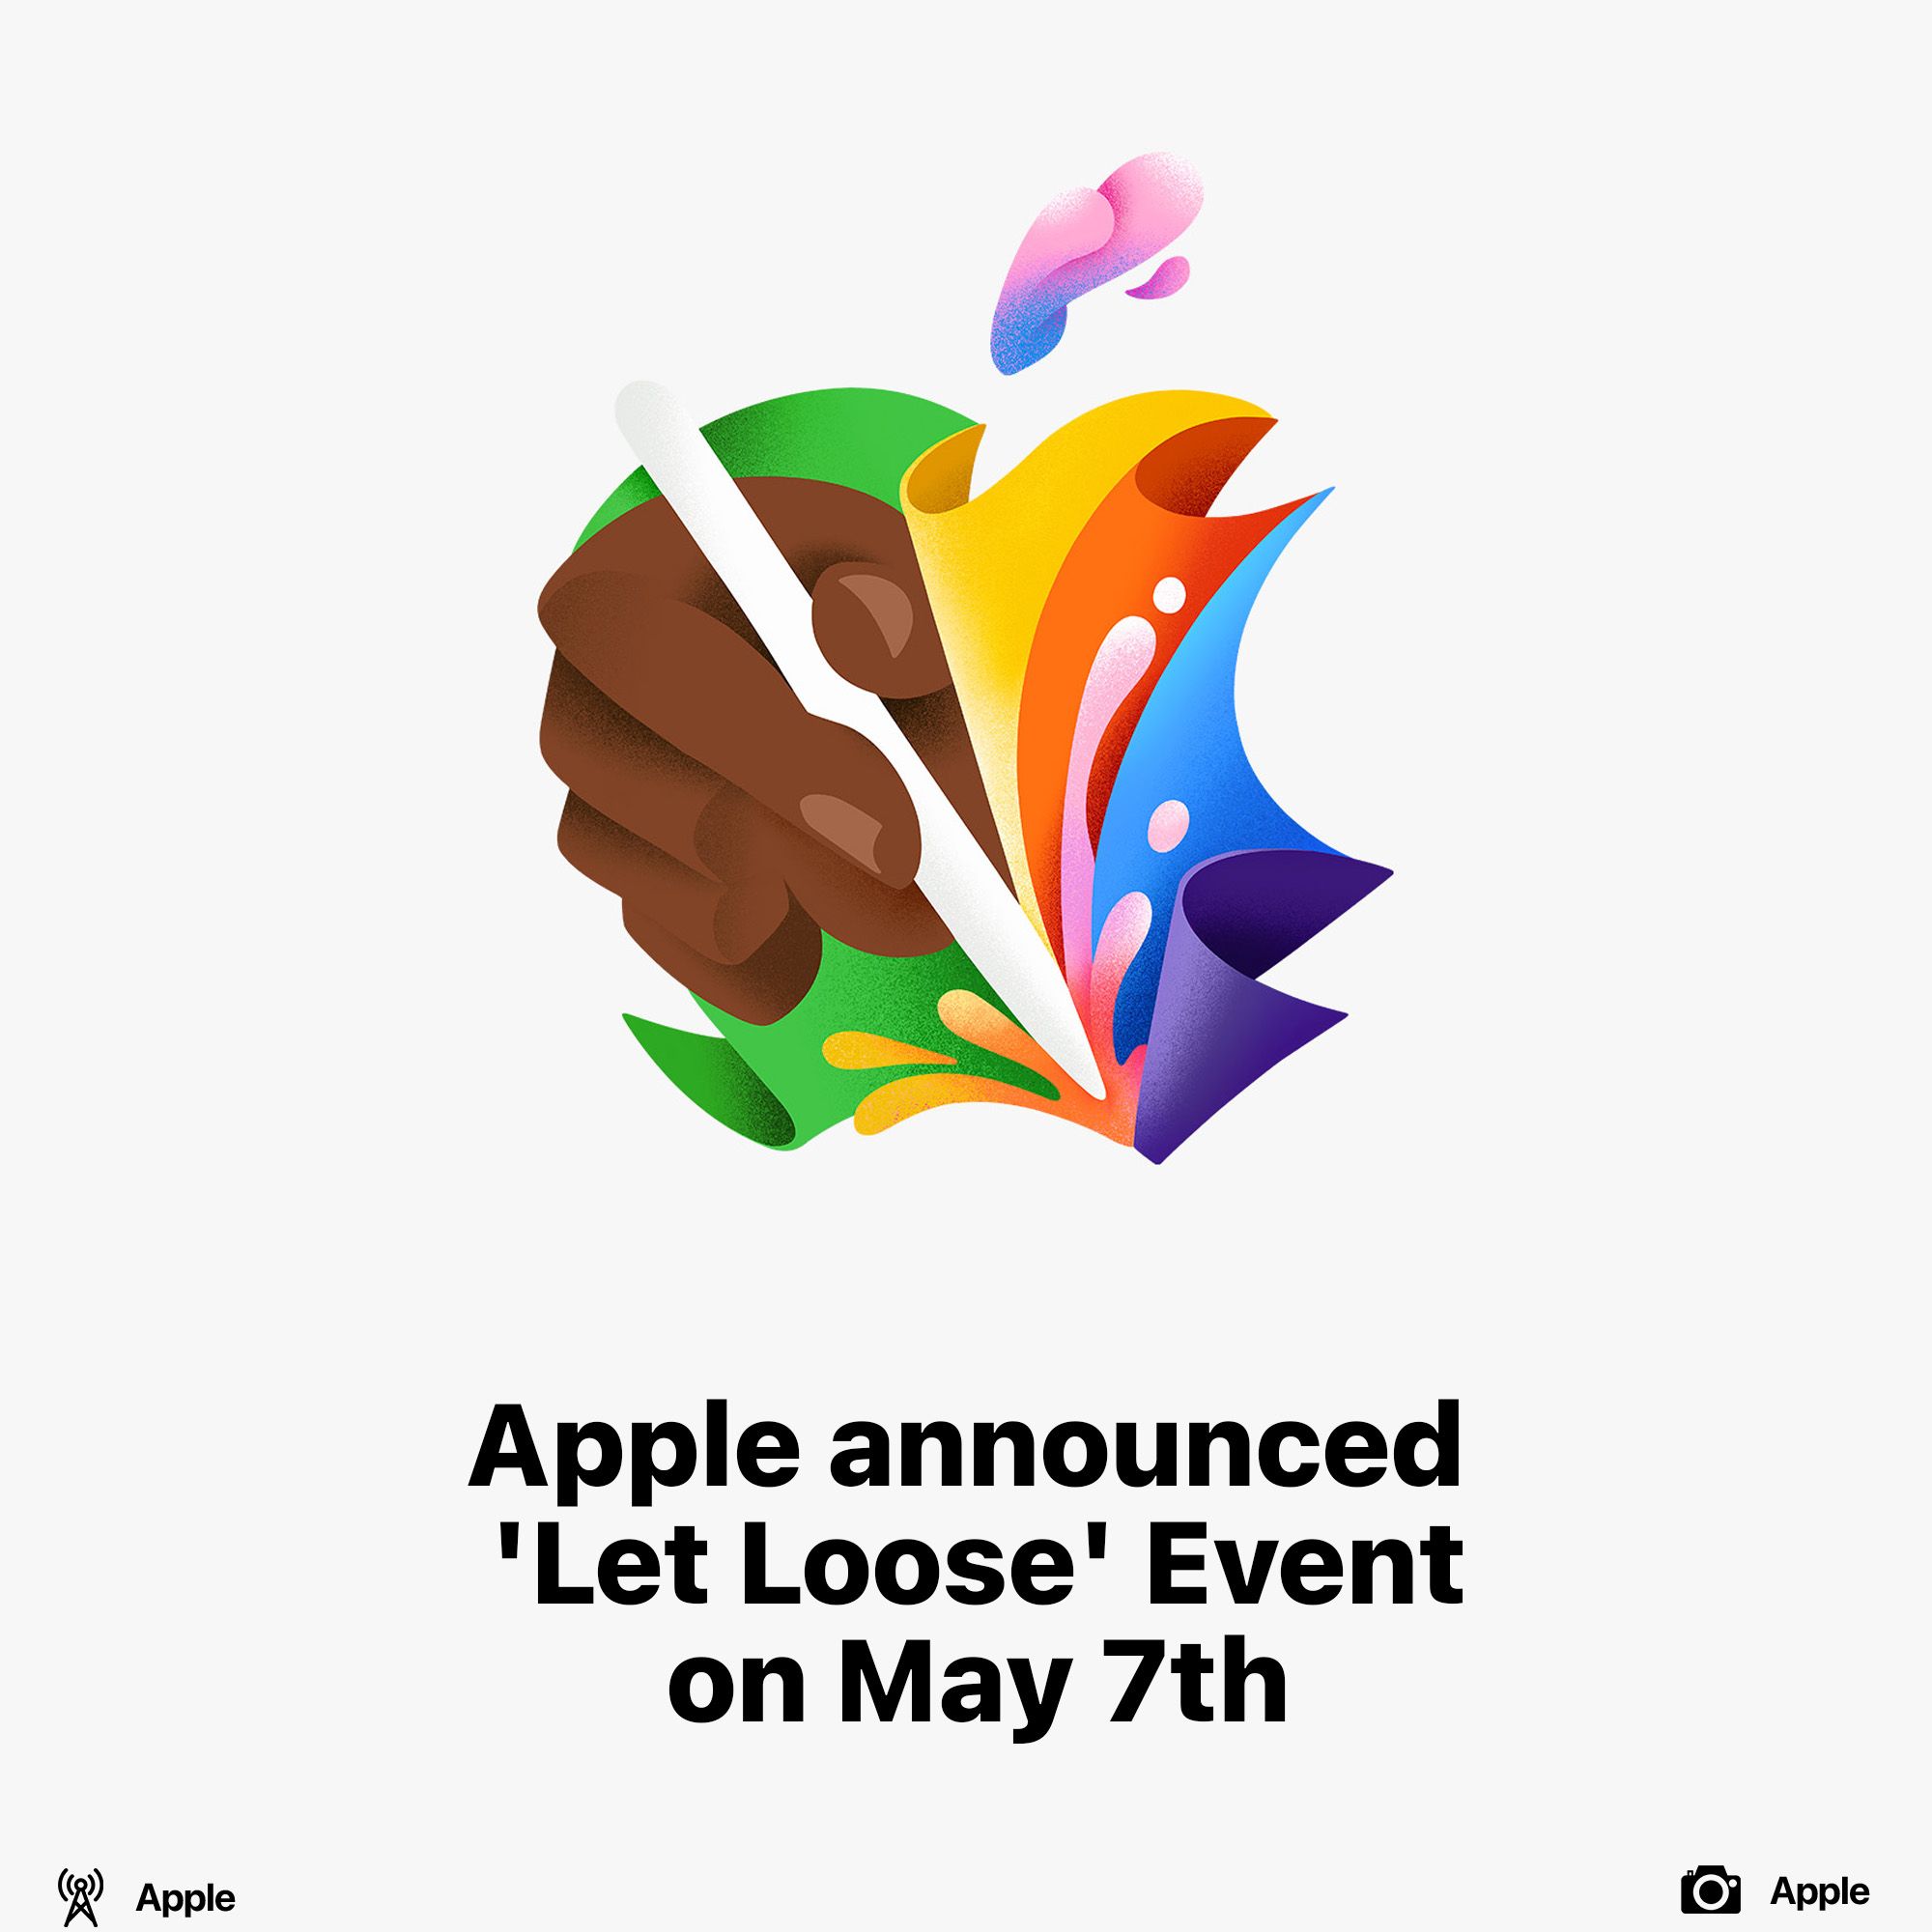 Next Apple event coming May 7th